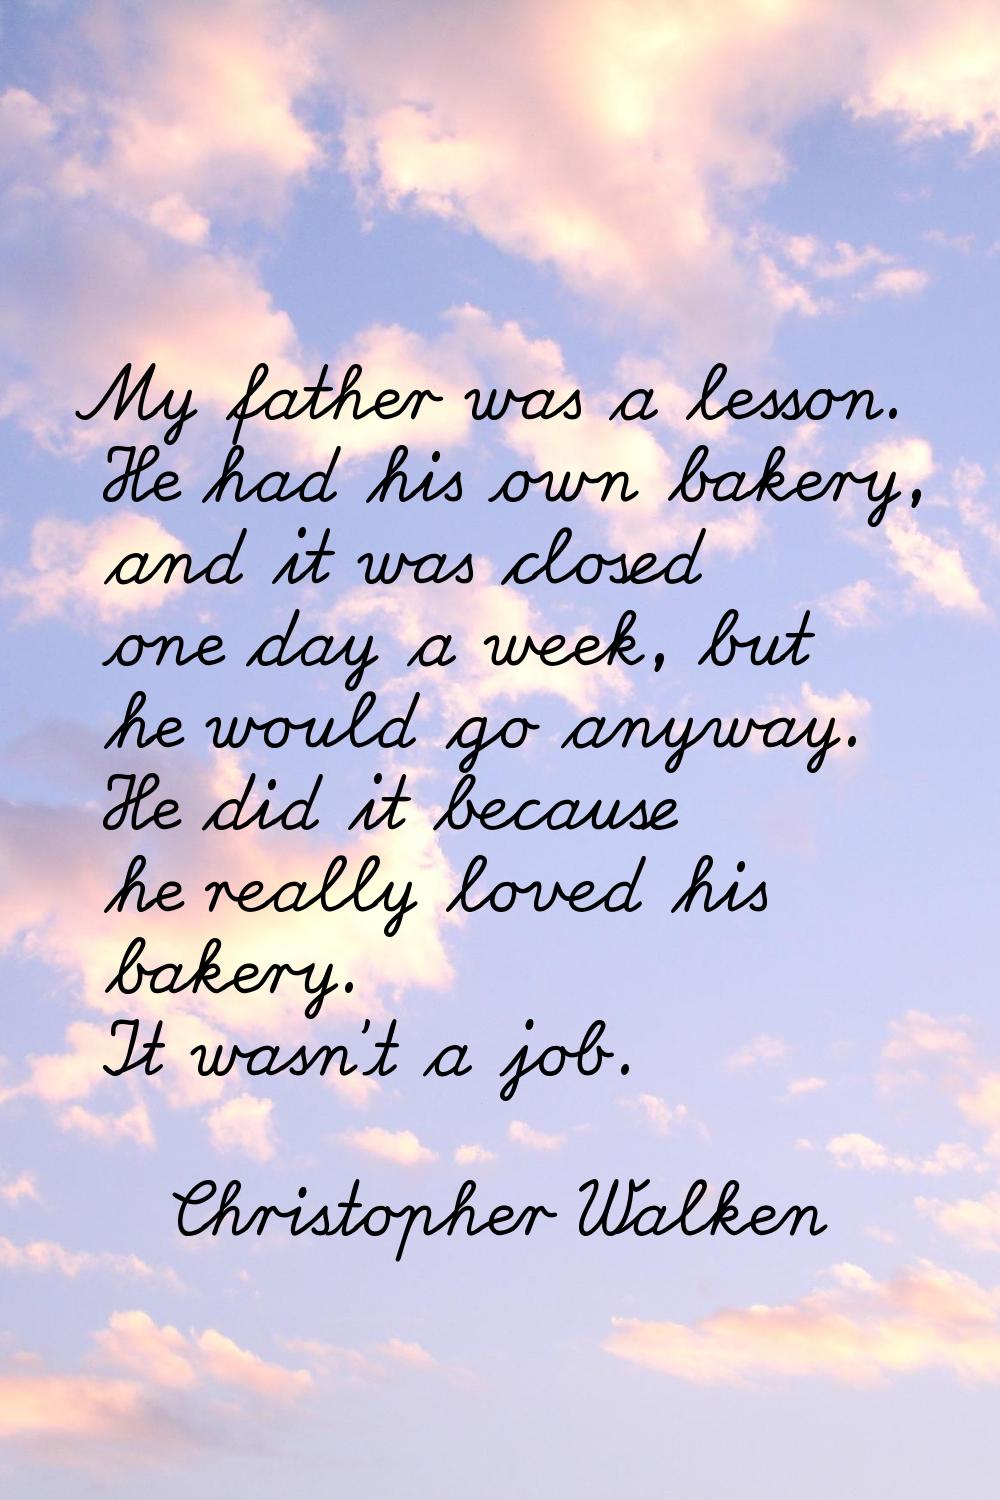 My father was a lesson. He had his own bakery, and it was closed one day a week, but he would go an